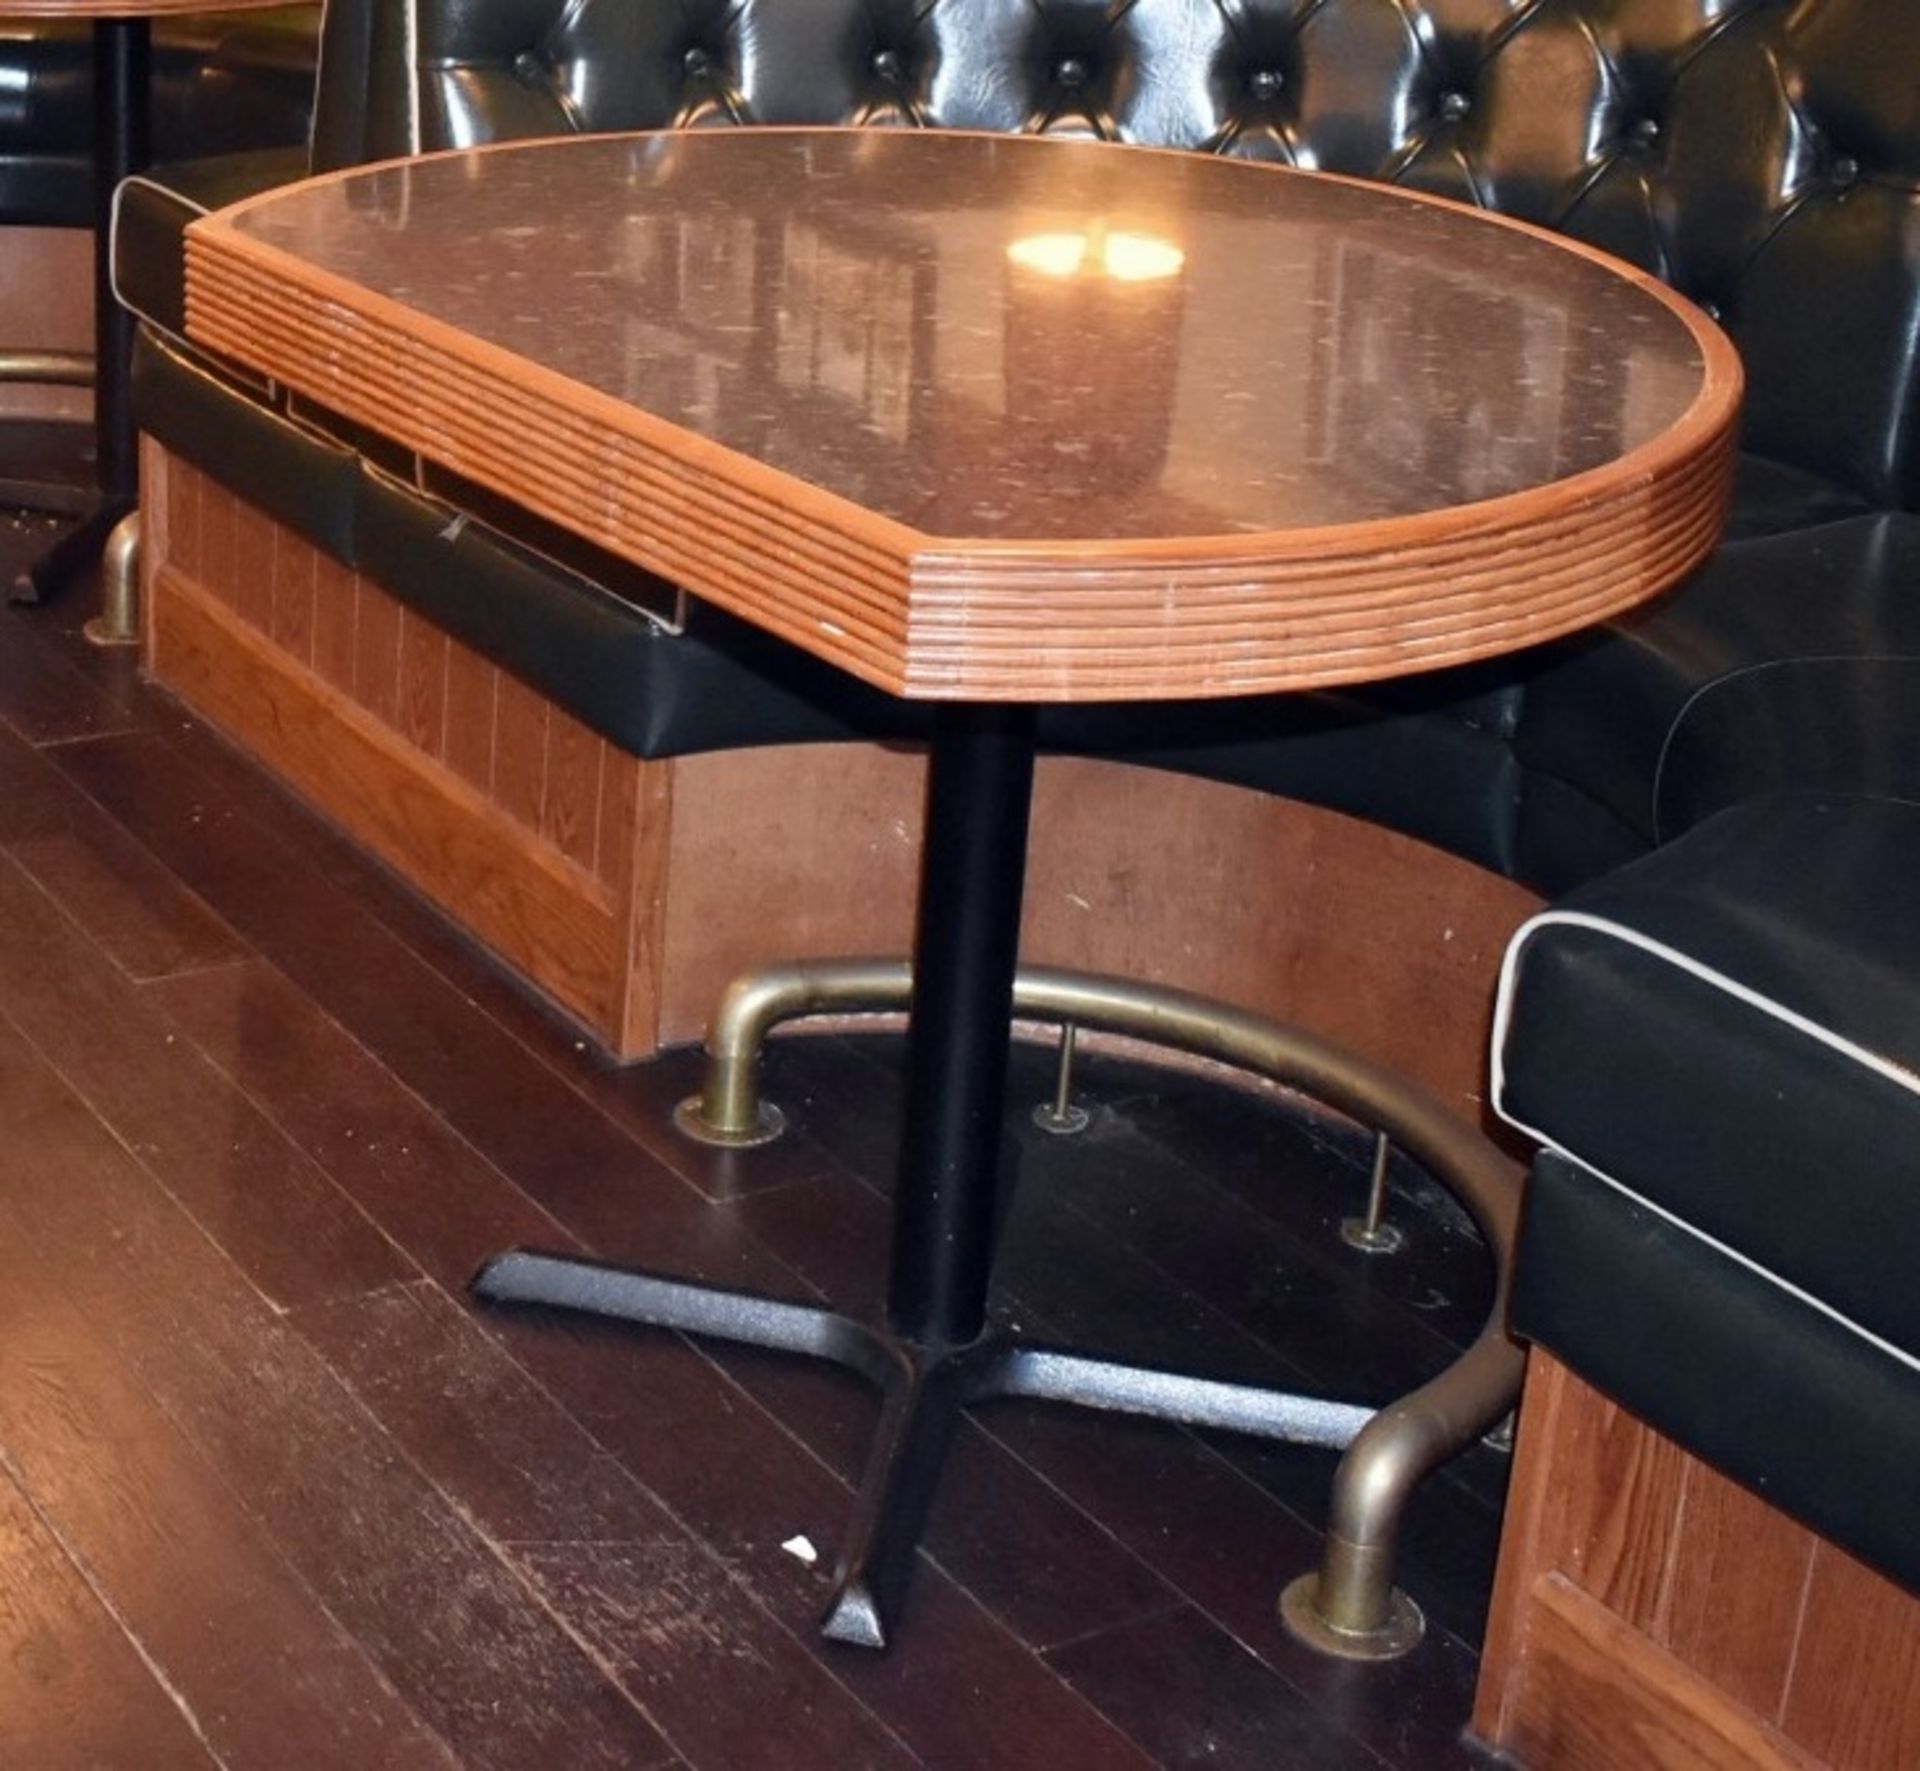 1 x Restaurant Semi-Circle Dining Table With Granite Style Surface, Wooden Edging and Cast Iron - Image 2 of 2